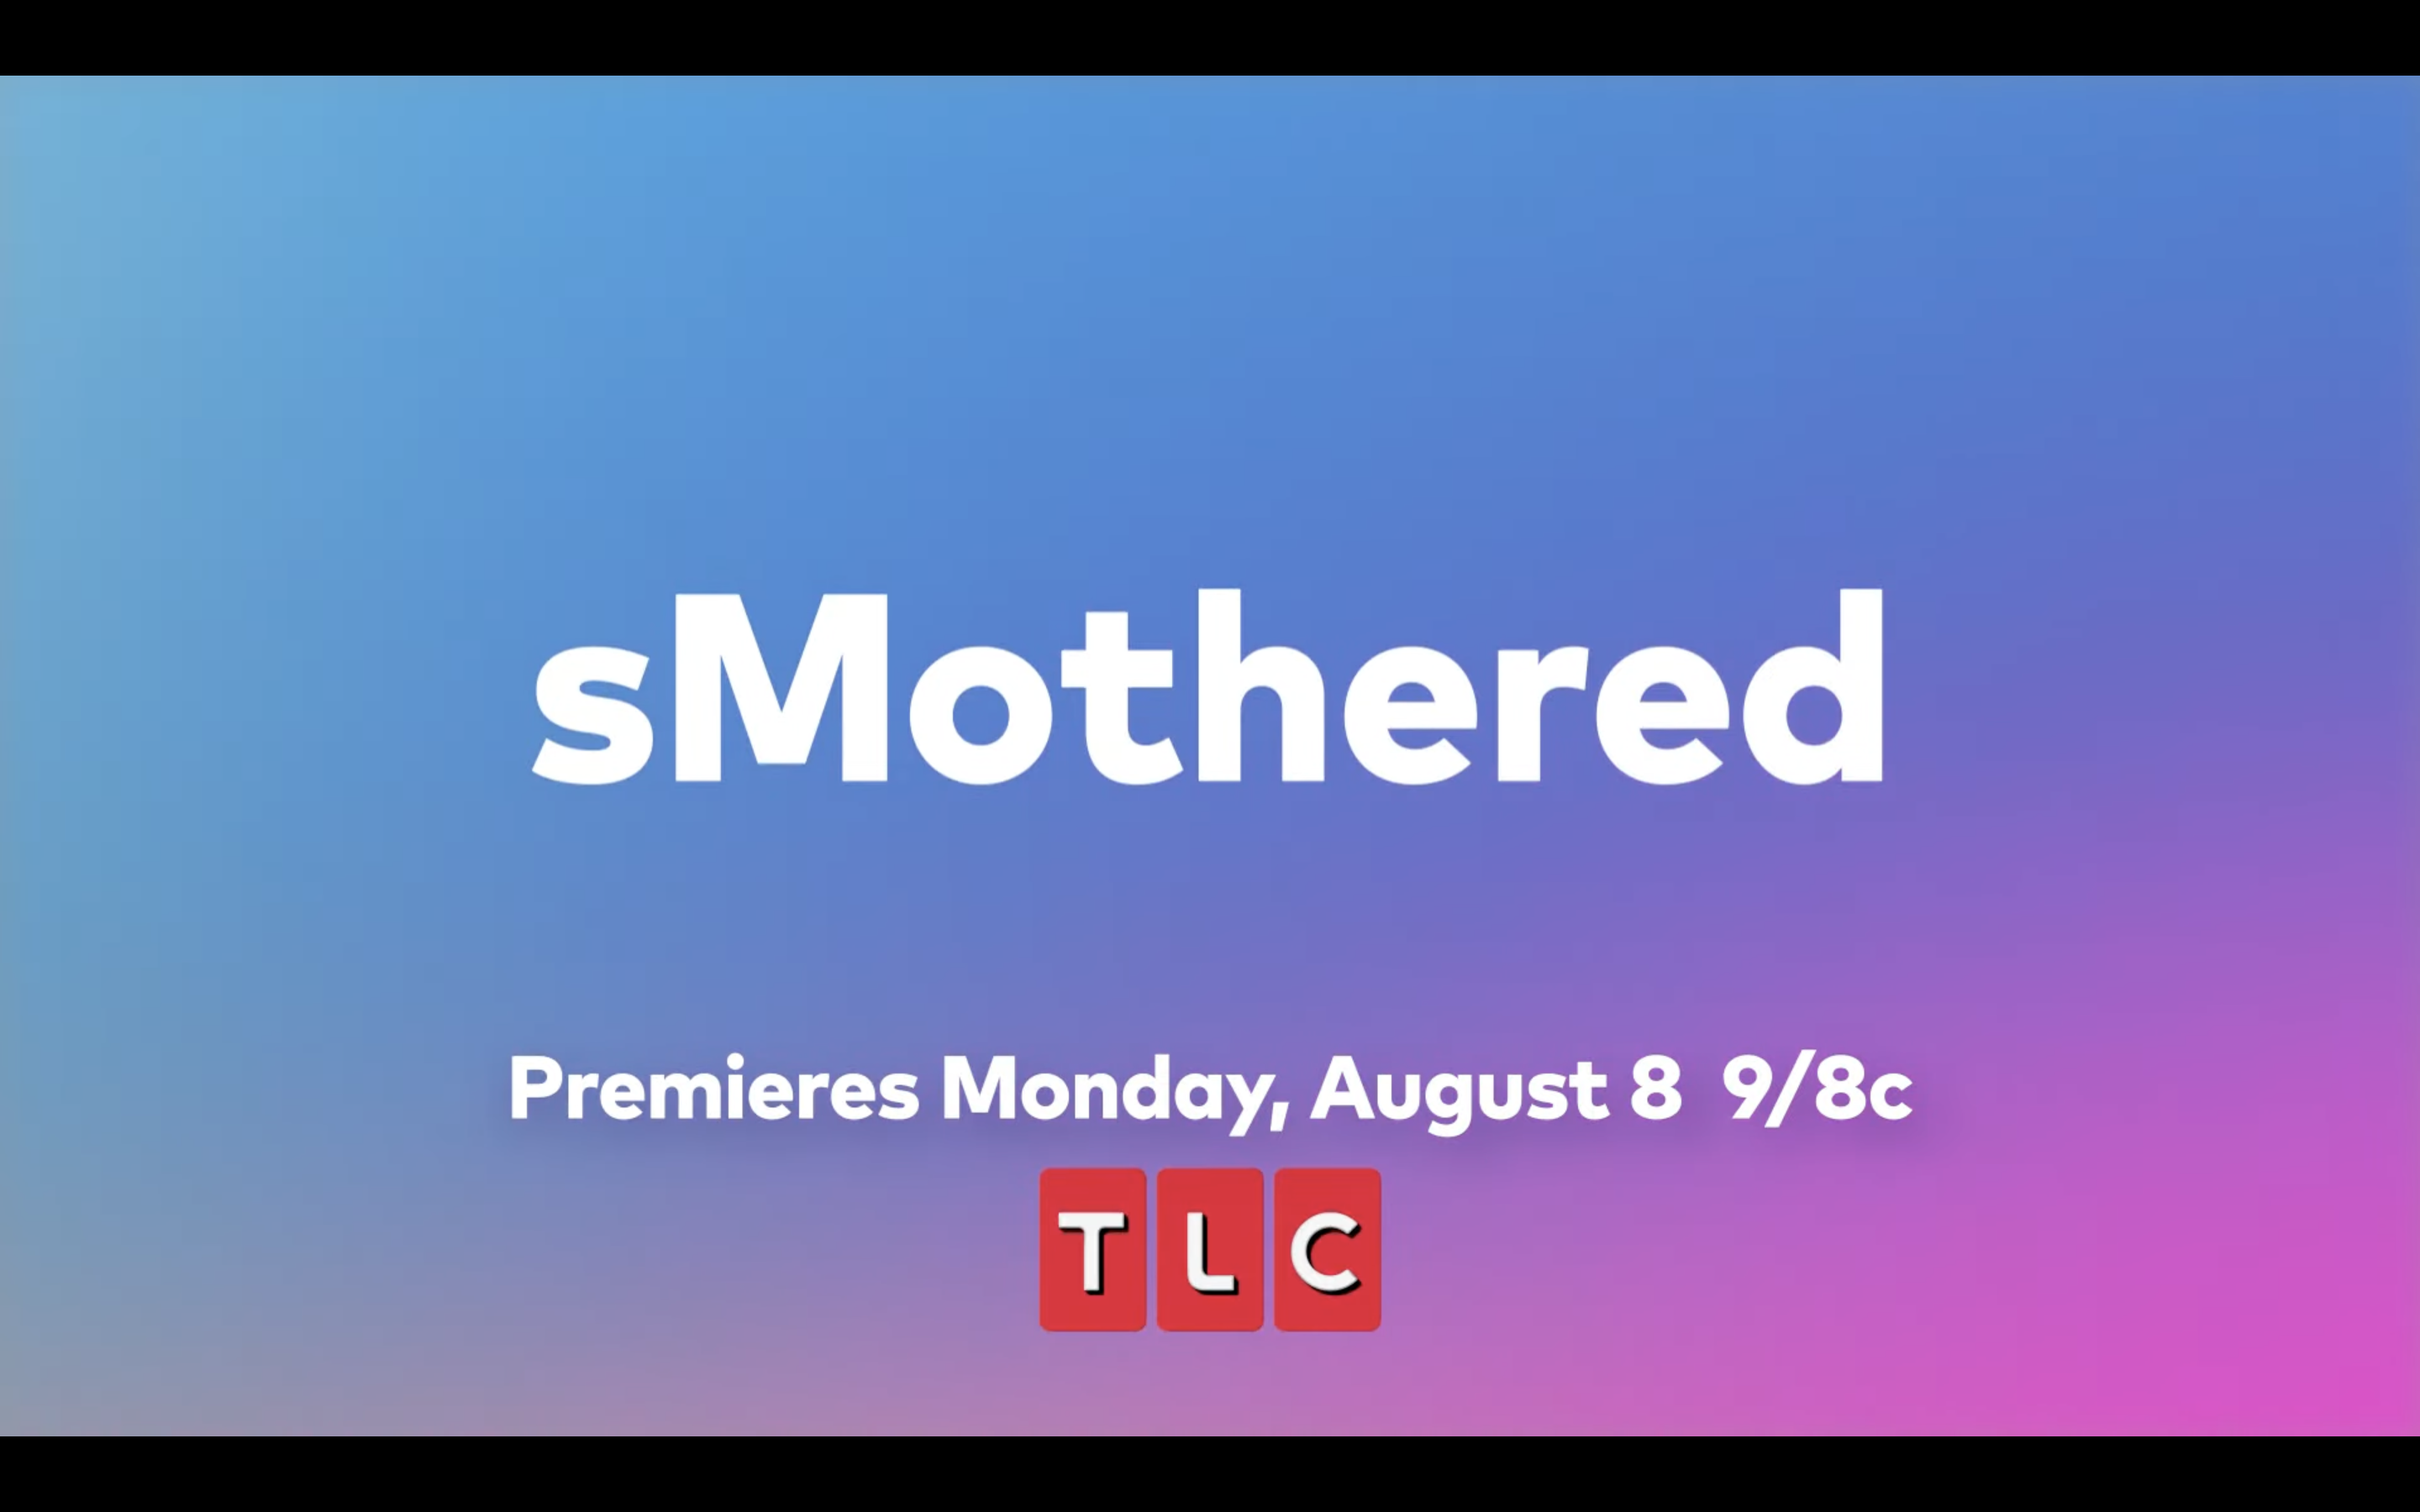 sMothered' Season 4 premiere: How to watch new season on TLC, TV